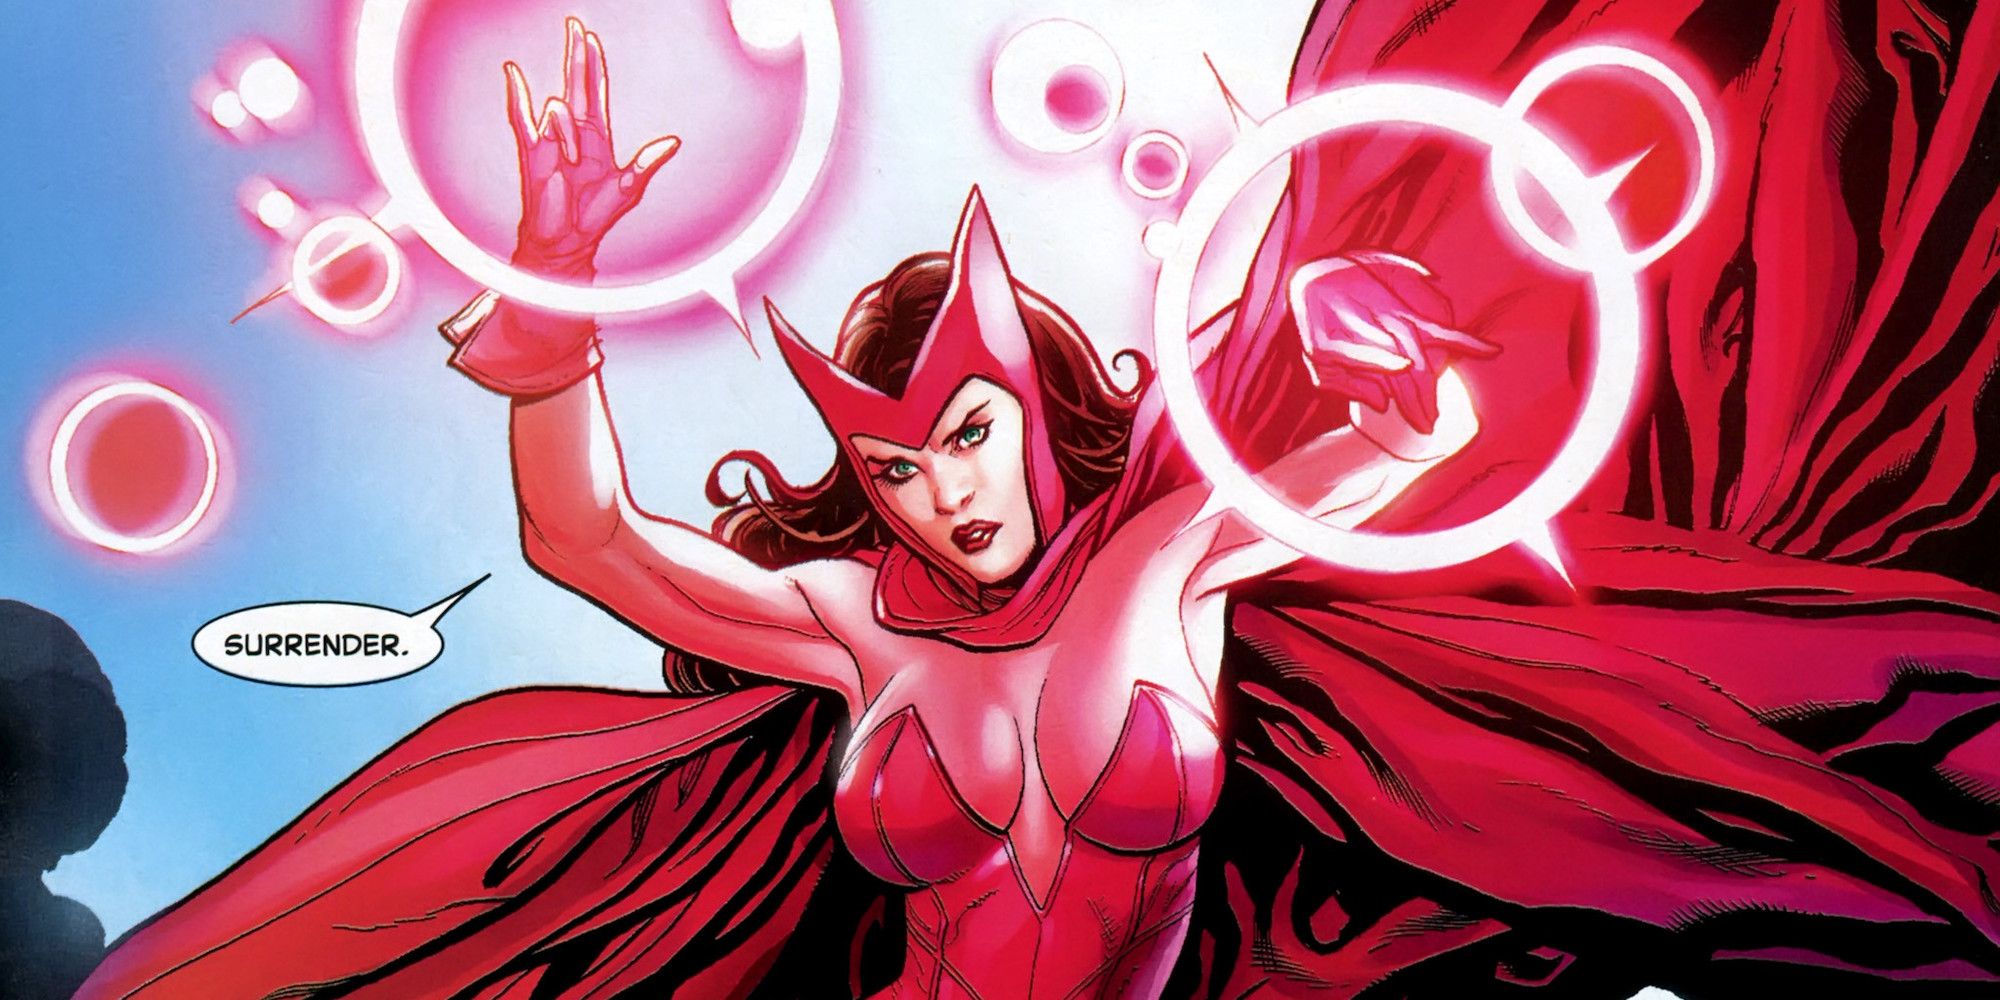 Scarlet Witch casting a hex in Marvel Comics